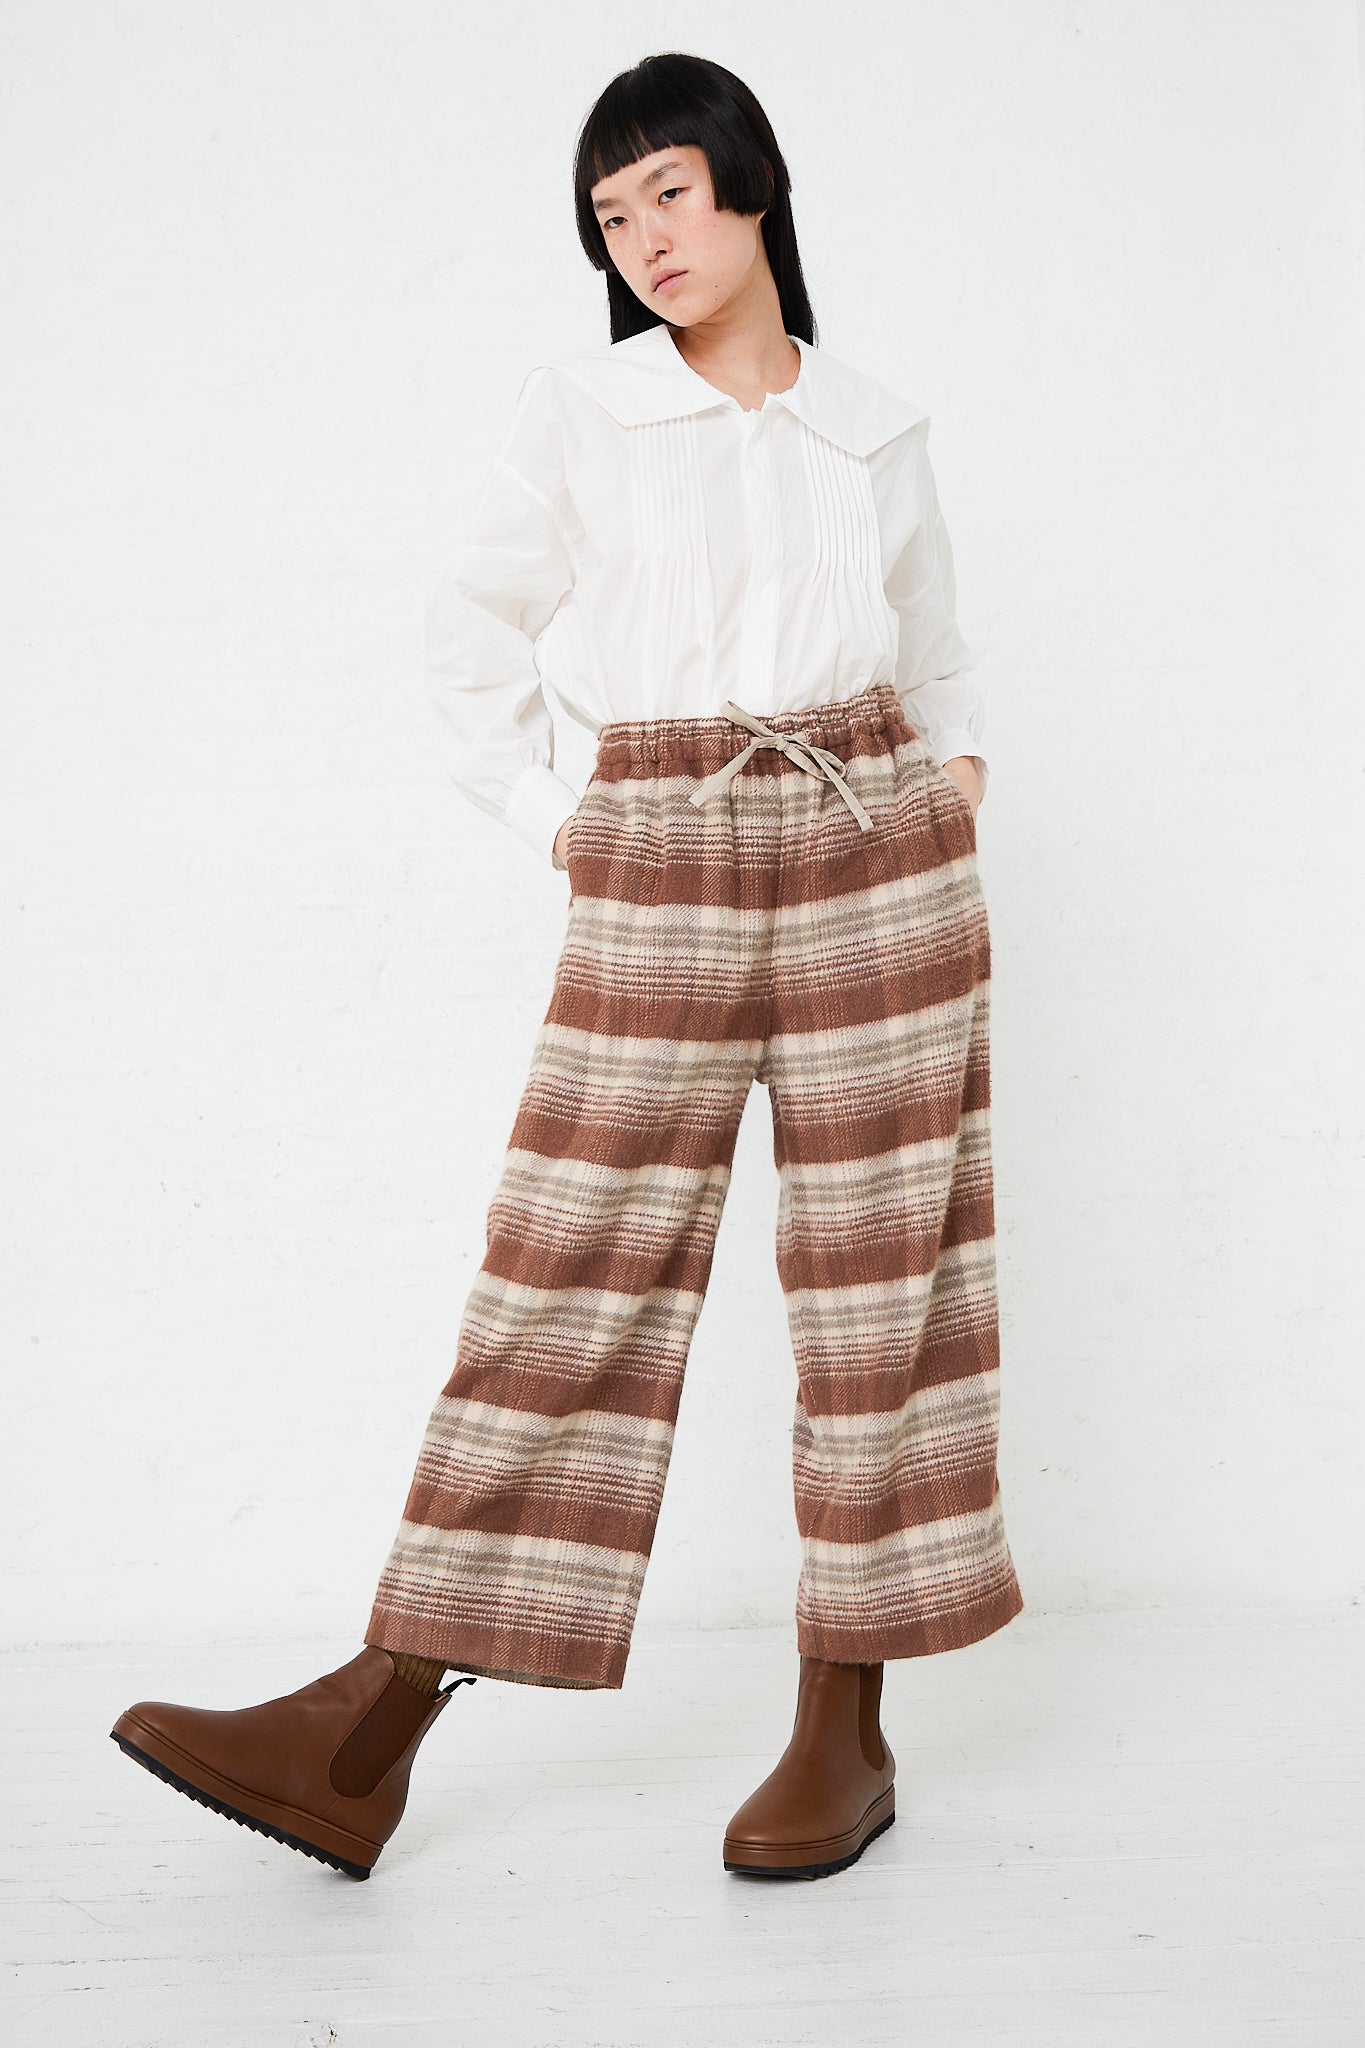 A woman wearing a white shirt and Silk Plaid Mosser Cloth Pajama Pants in Cocoa Brown by Toujours.